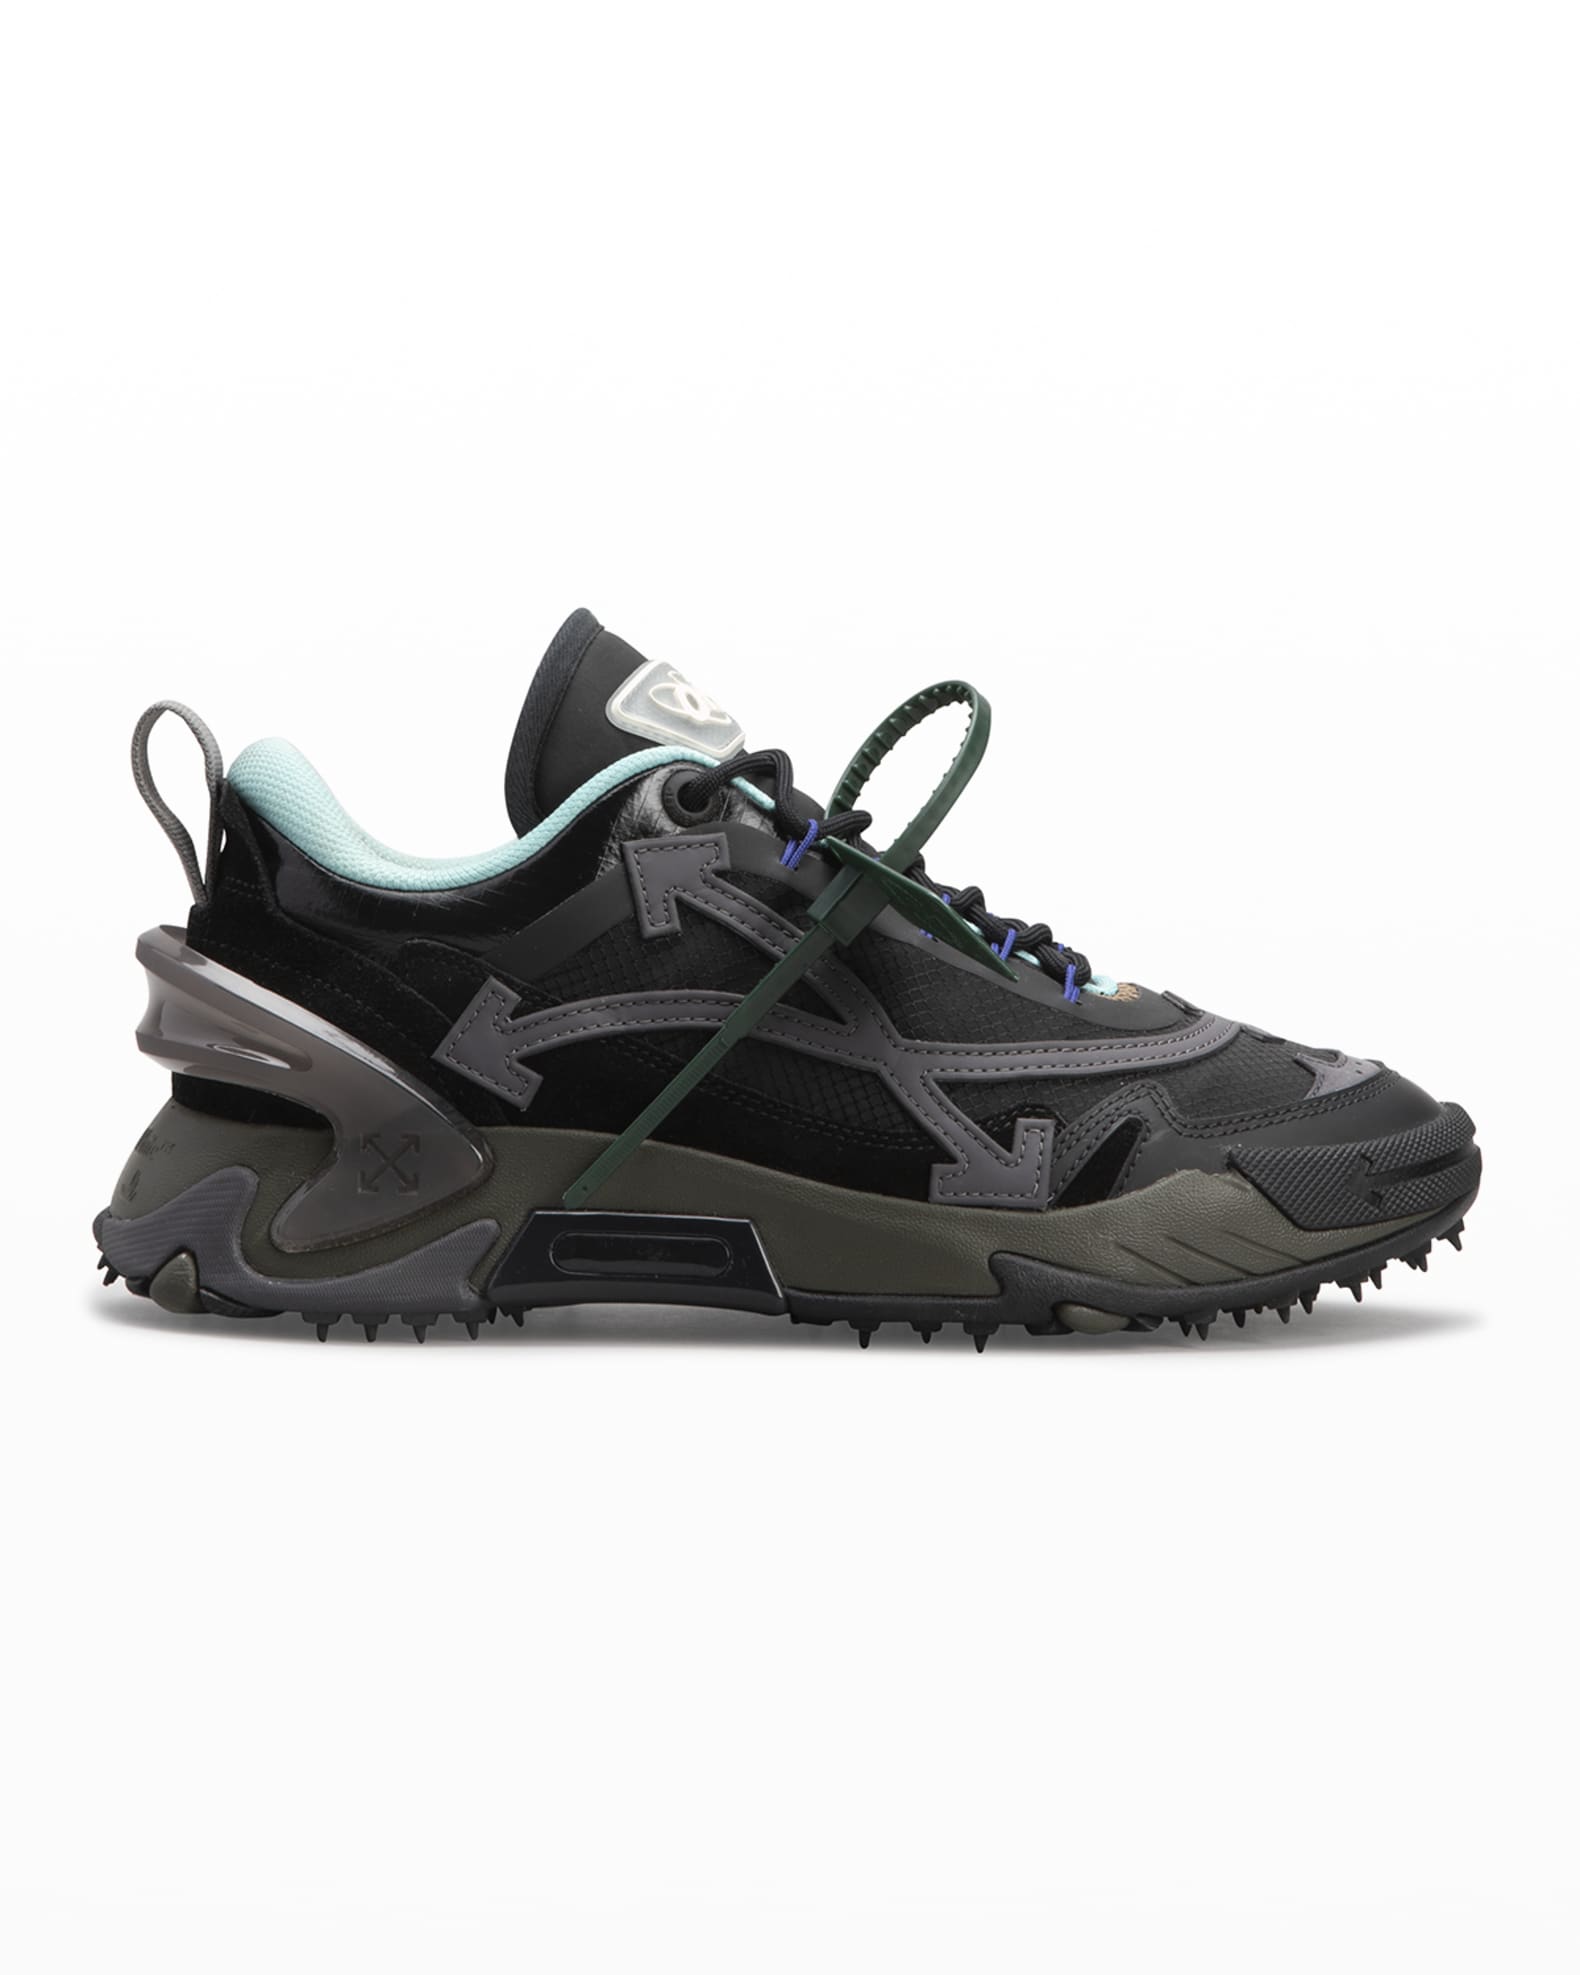 Off-White Men's Odsy-2000 Sneakers | Neiman Marcus